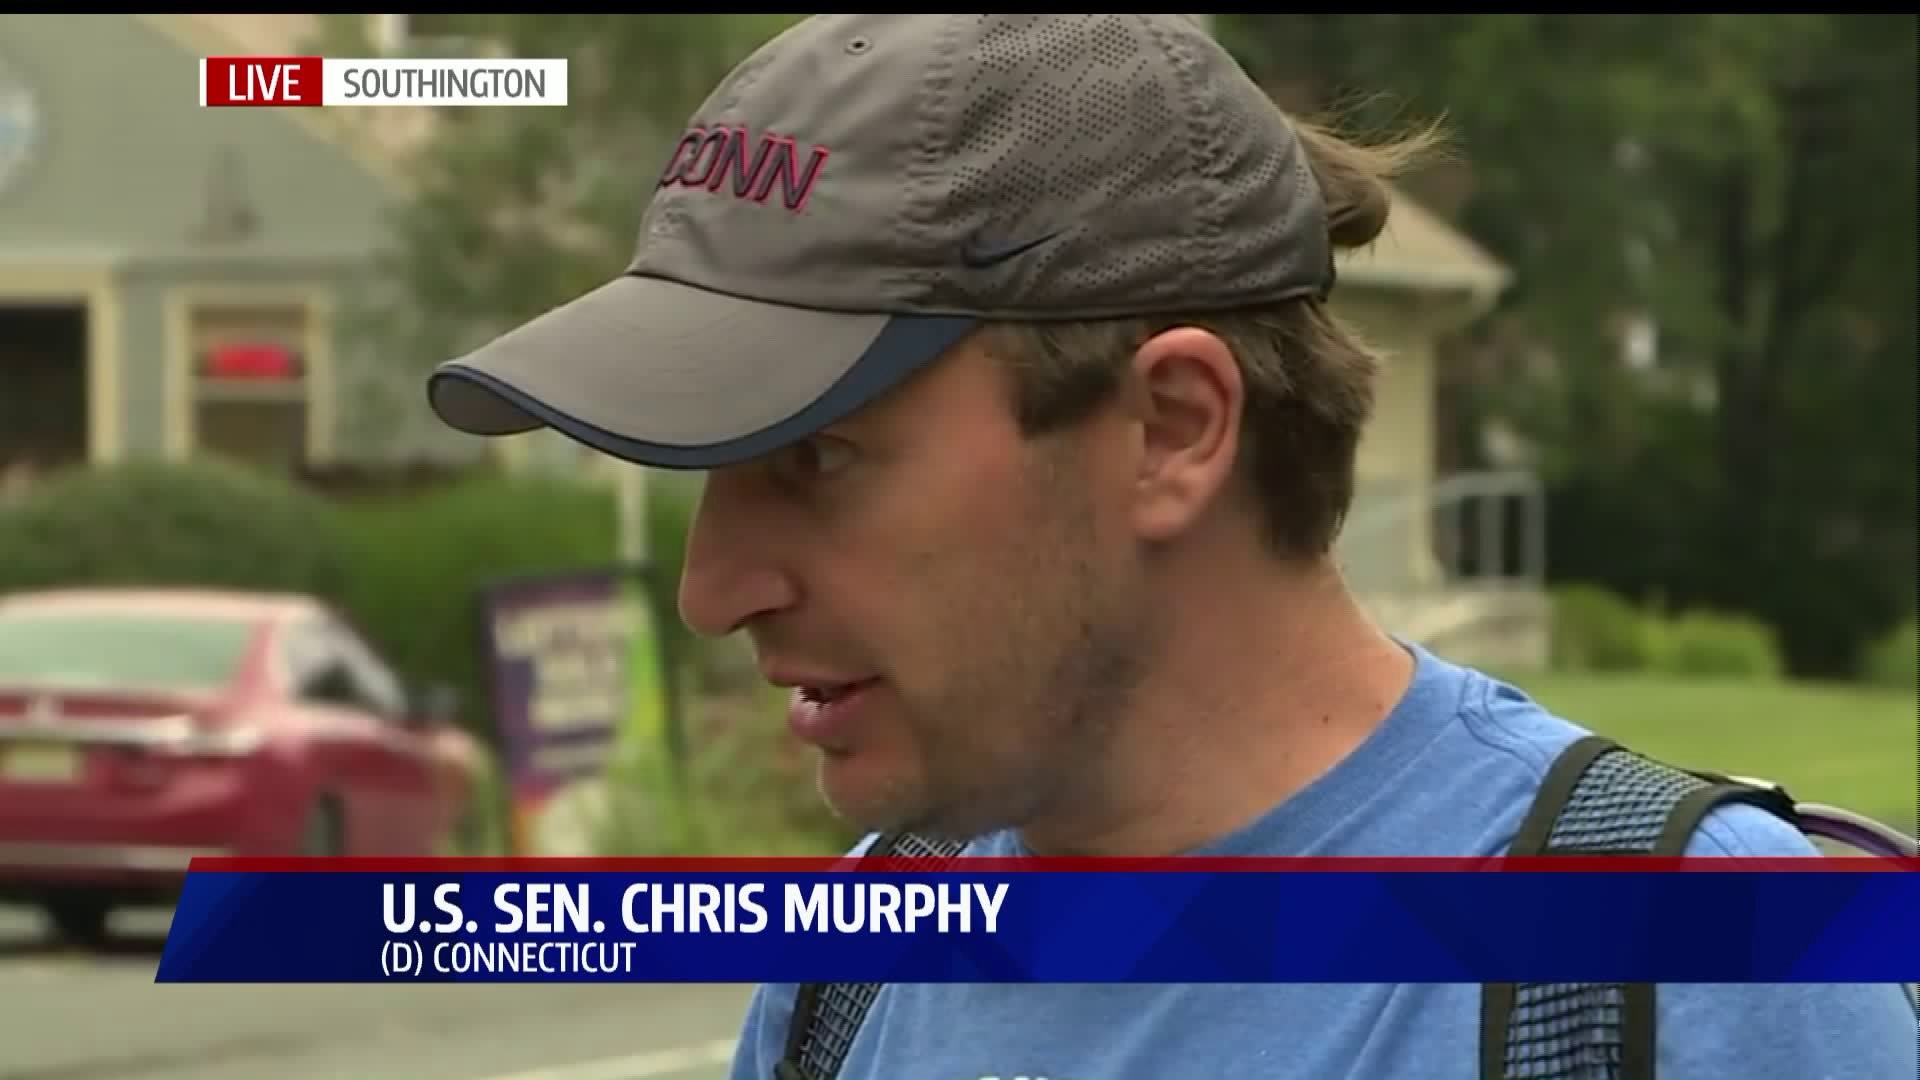 Murphy continues his walkacross the state